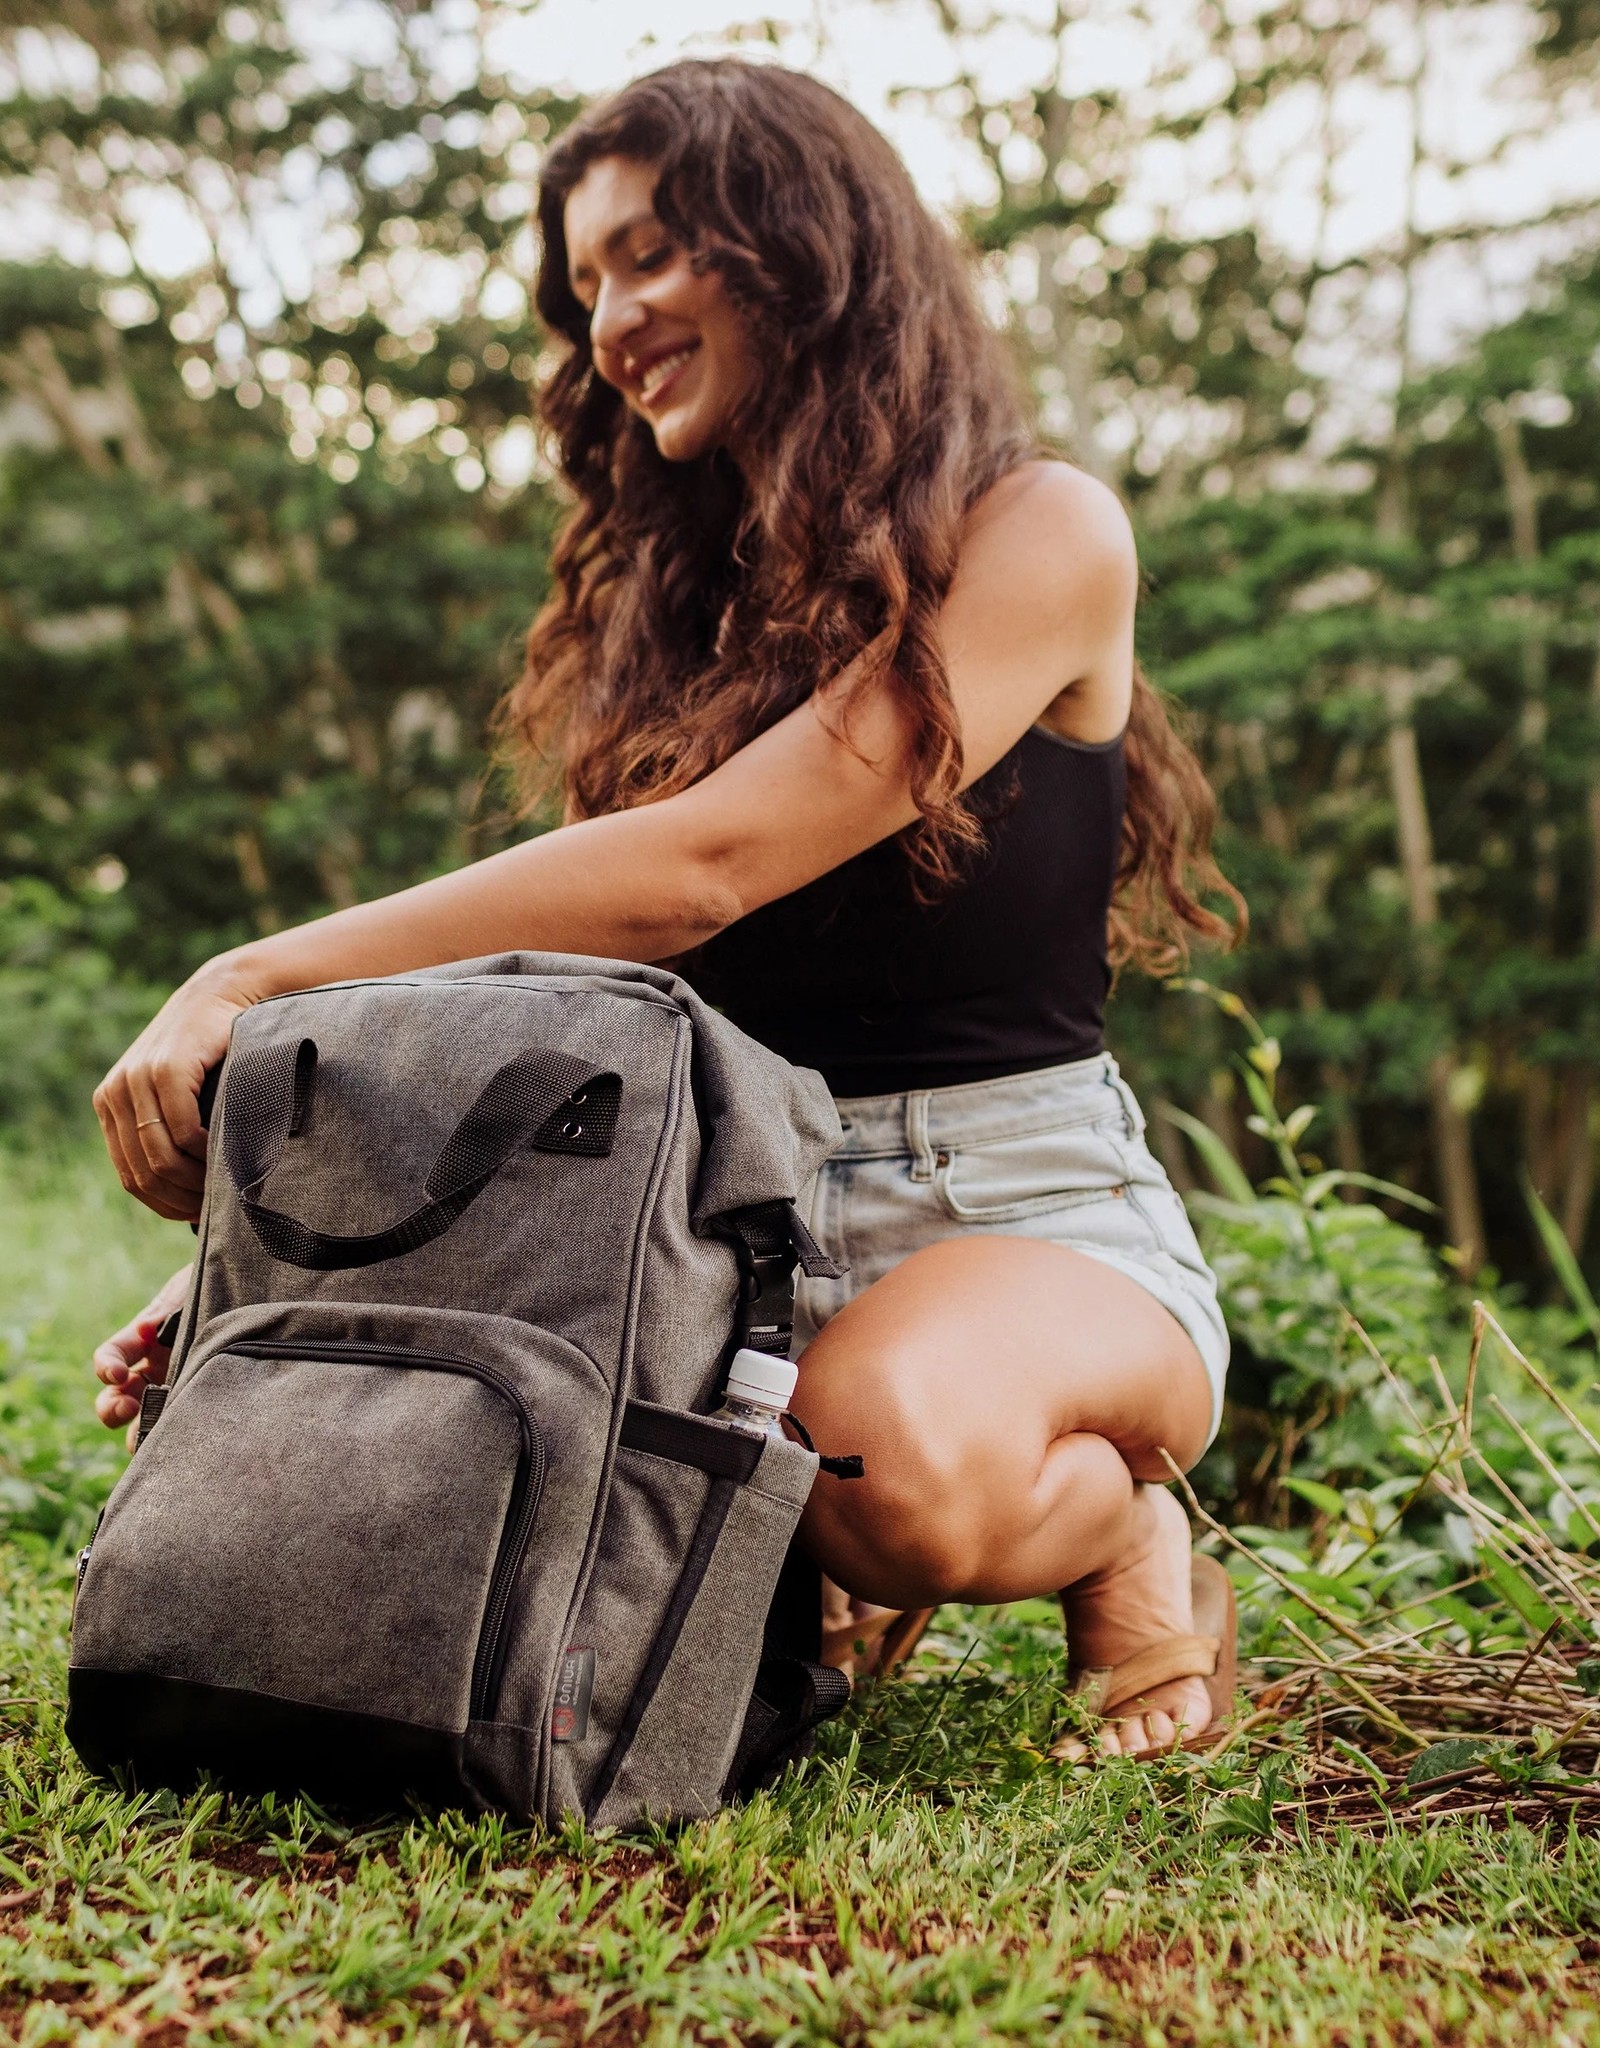 Picnic Time On the Go Roll-top Cooler Backpack